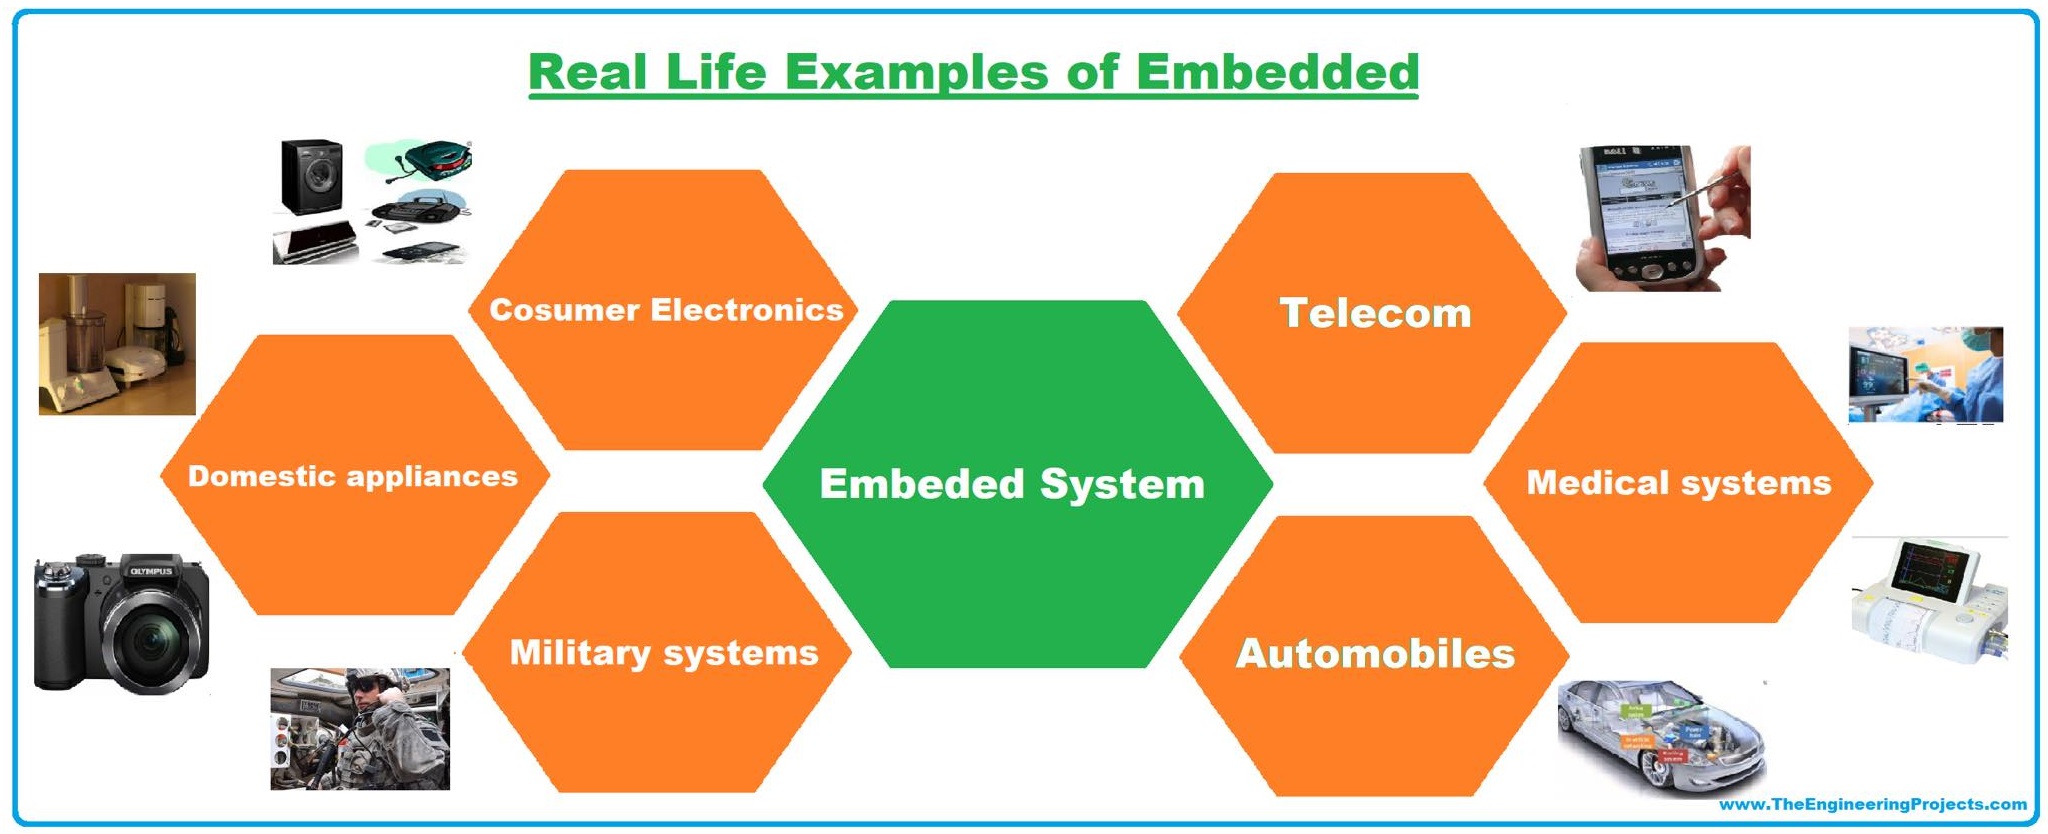 embedded system, embedded systems, what is embedded system, what is an embedded system, examples of embedded system, embedded systems examples